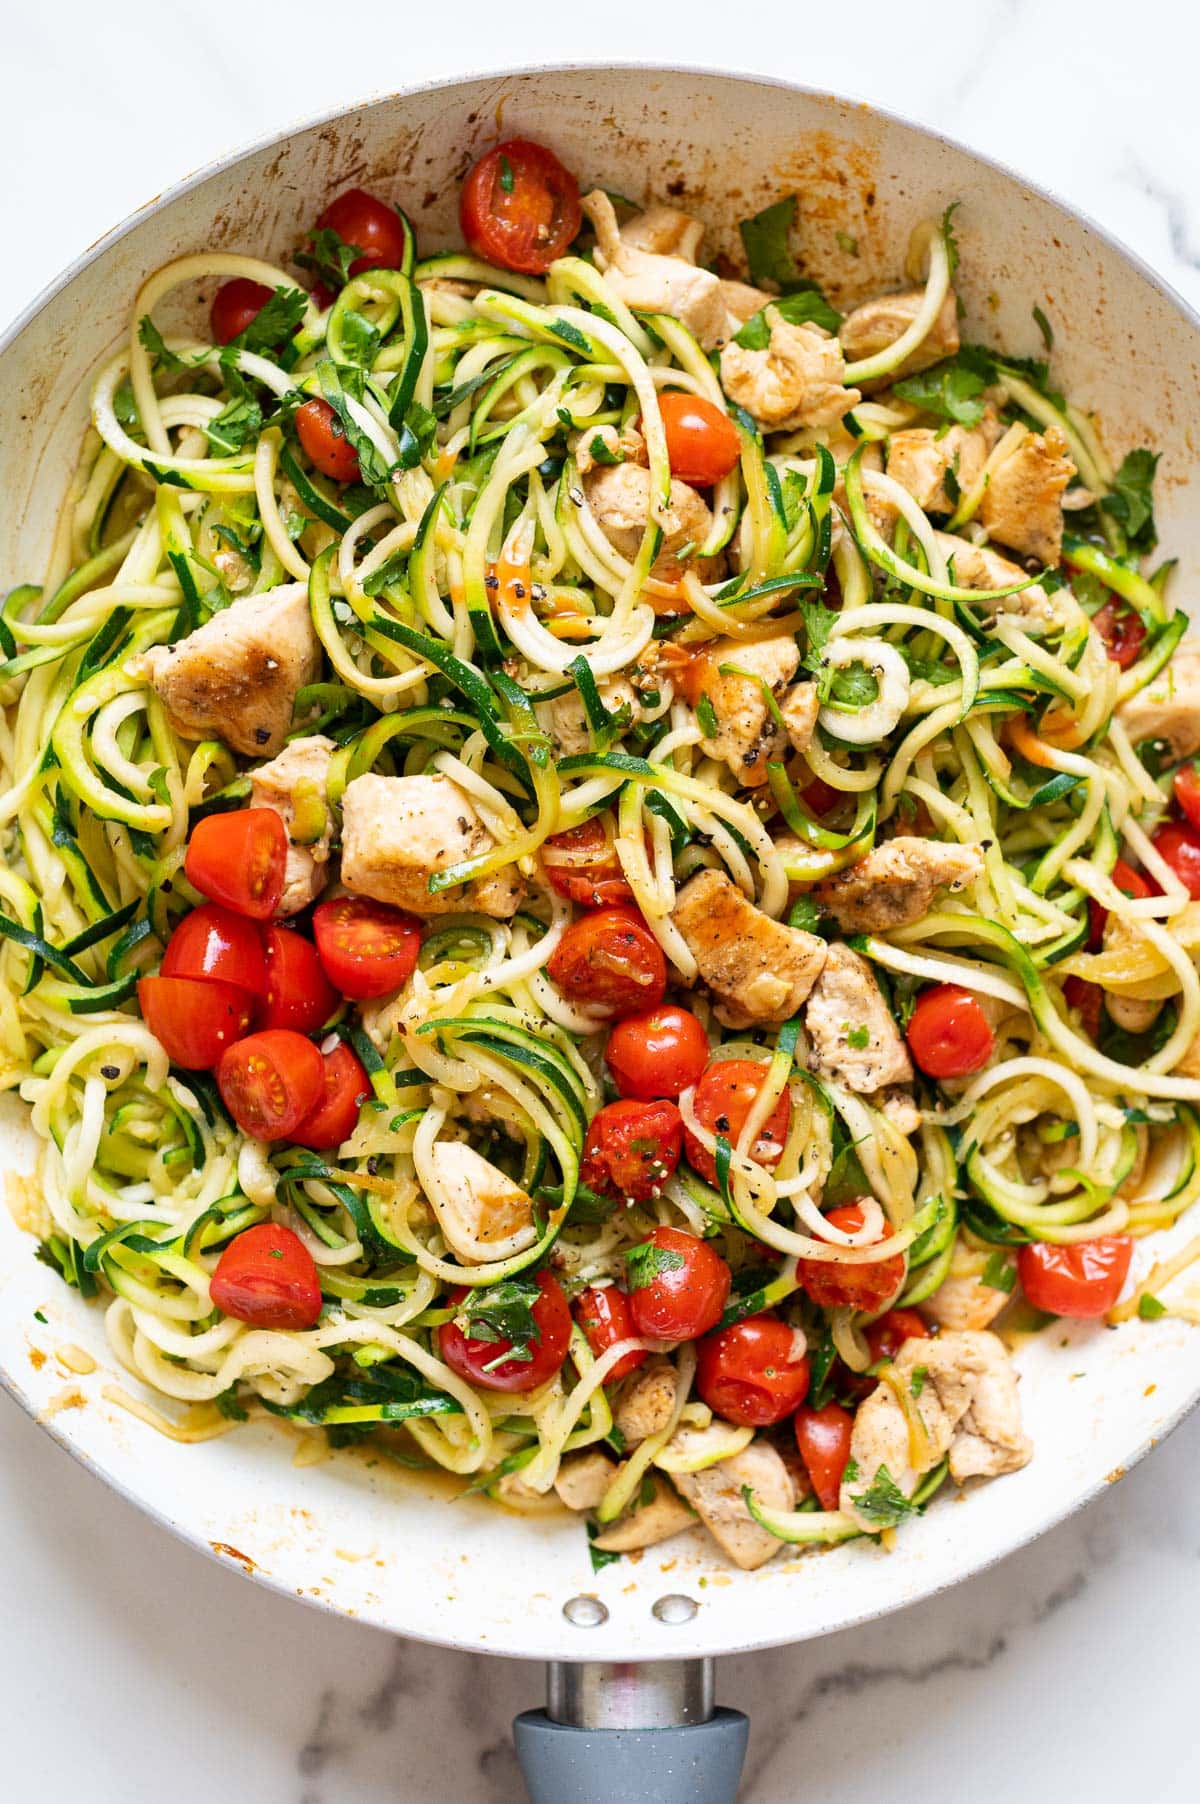 Zucchini noodles with chicken, grape tomatoes and cilantro in white skillet.